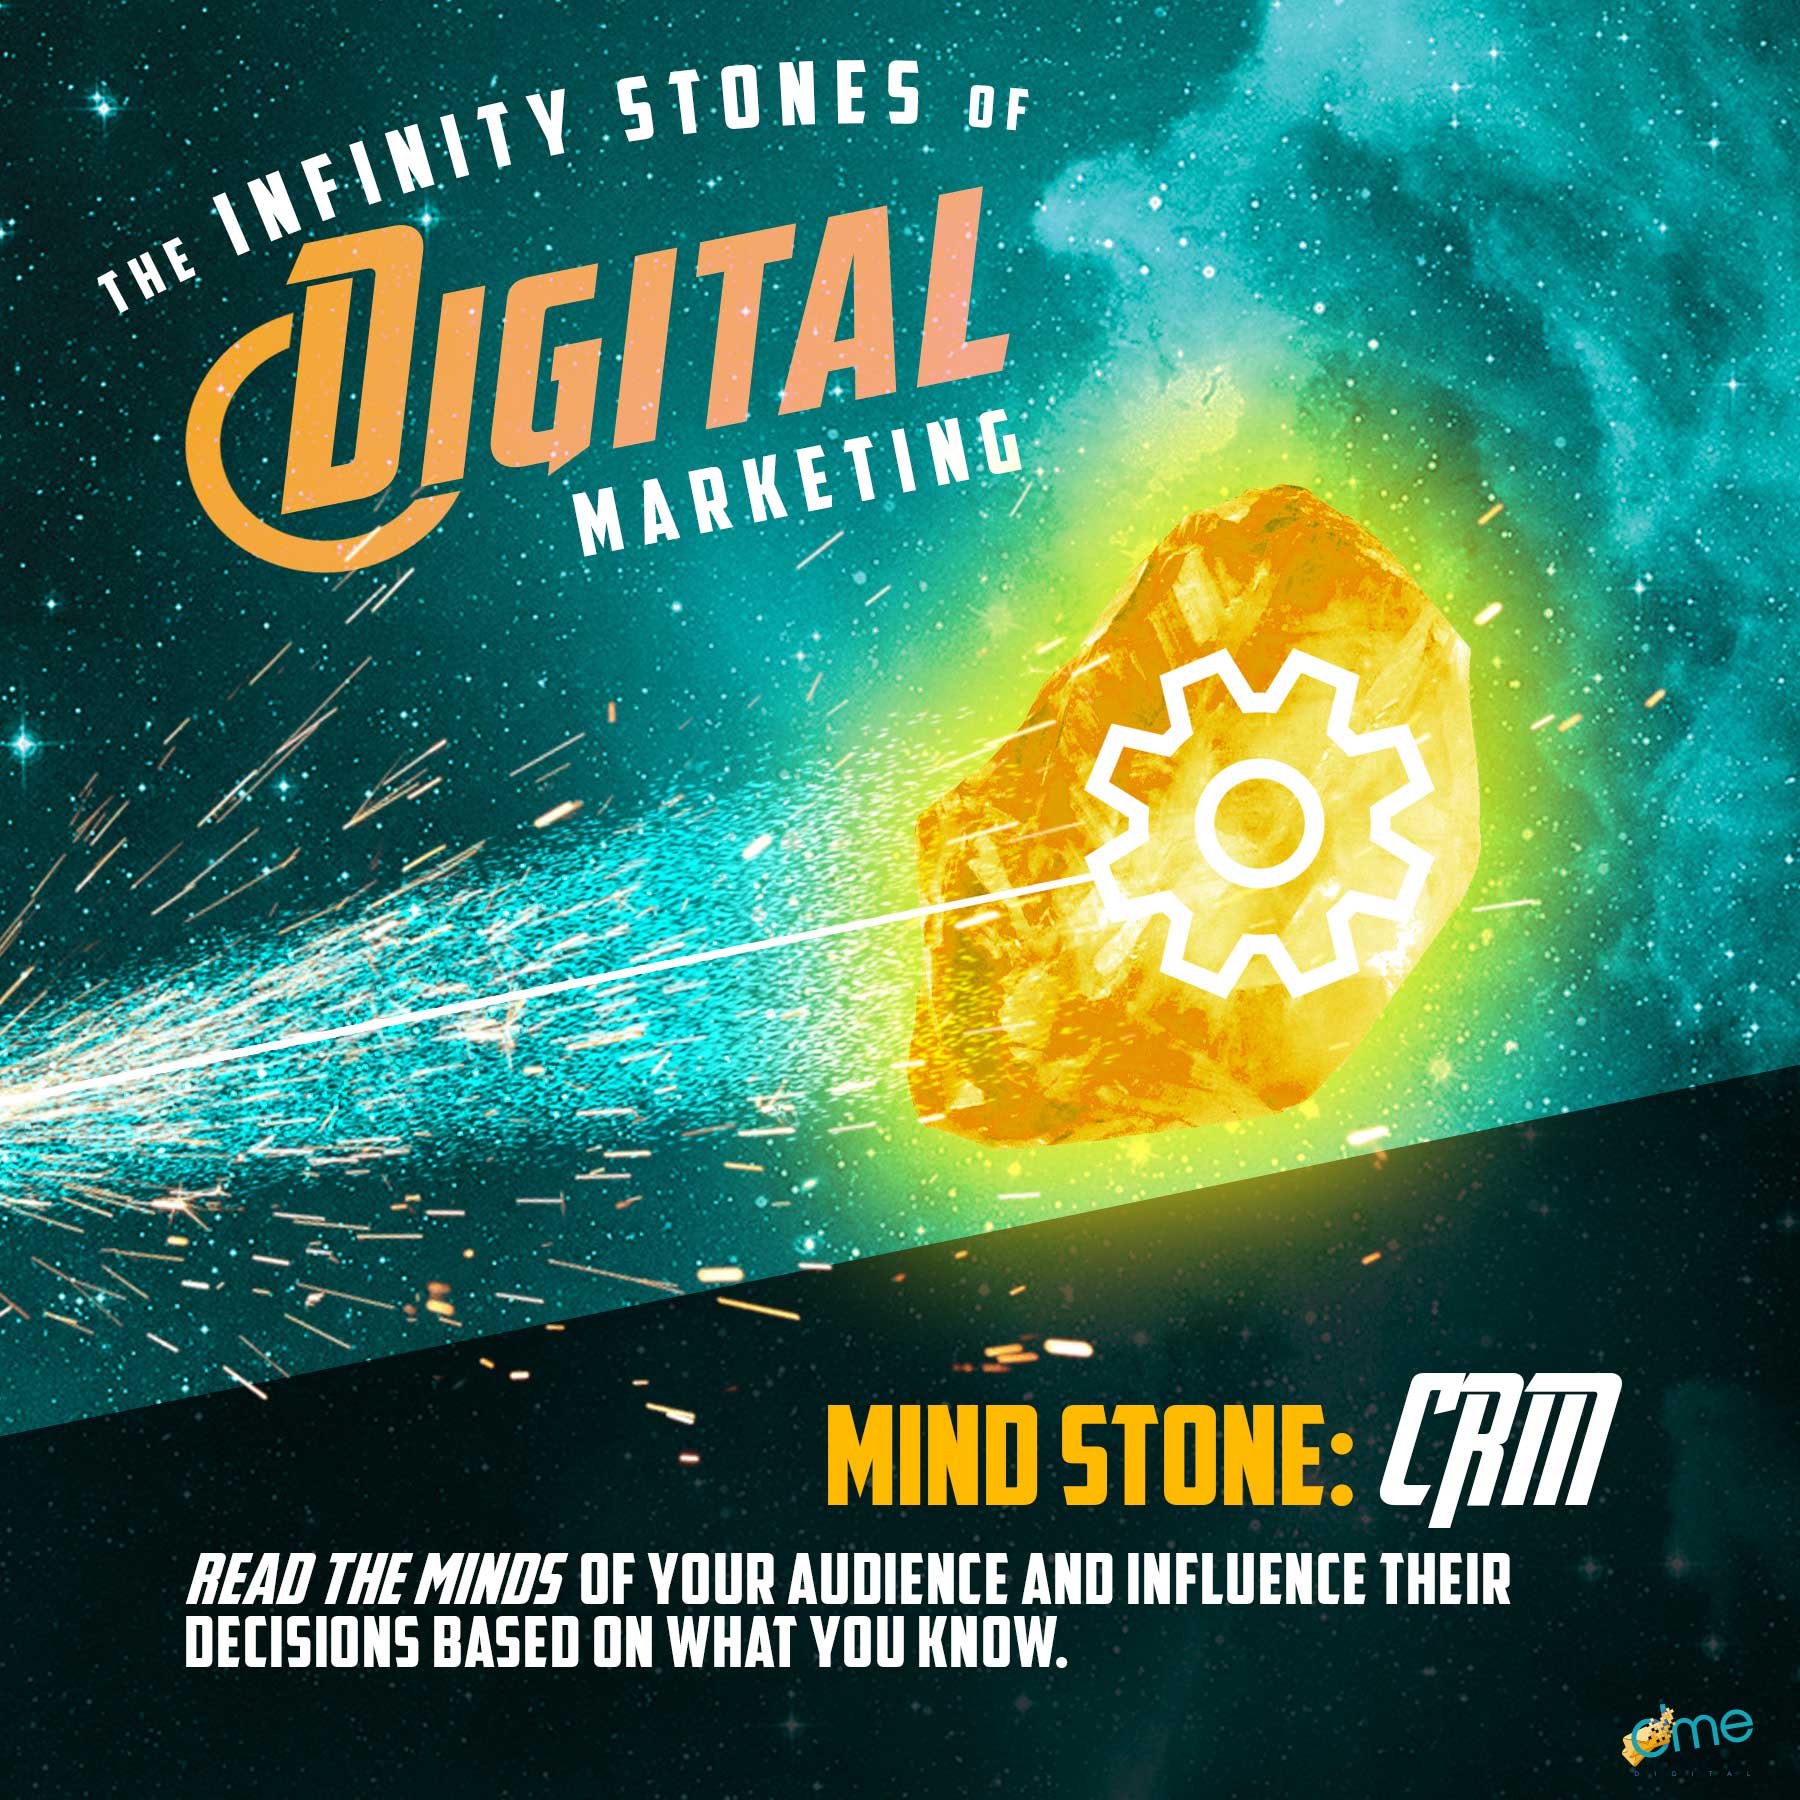 The mind stone of digital marketing is CRM.